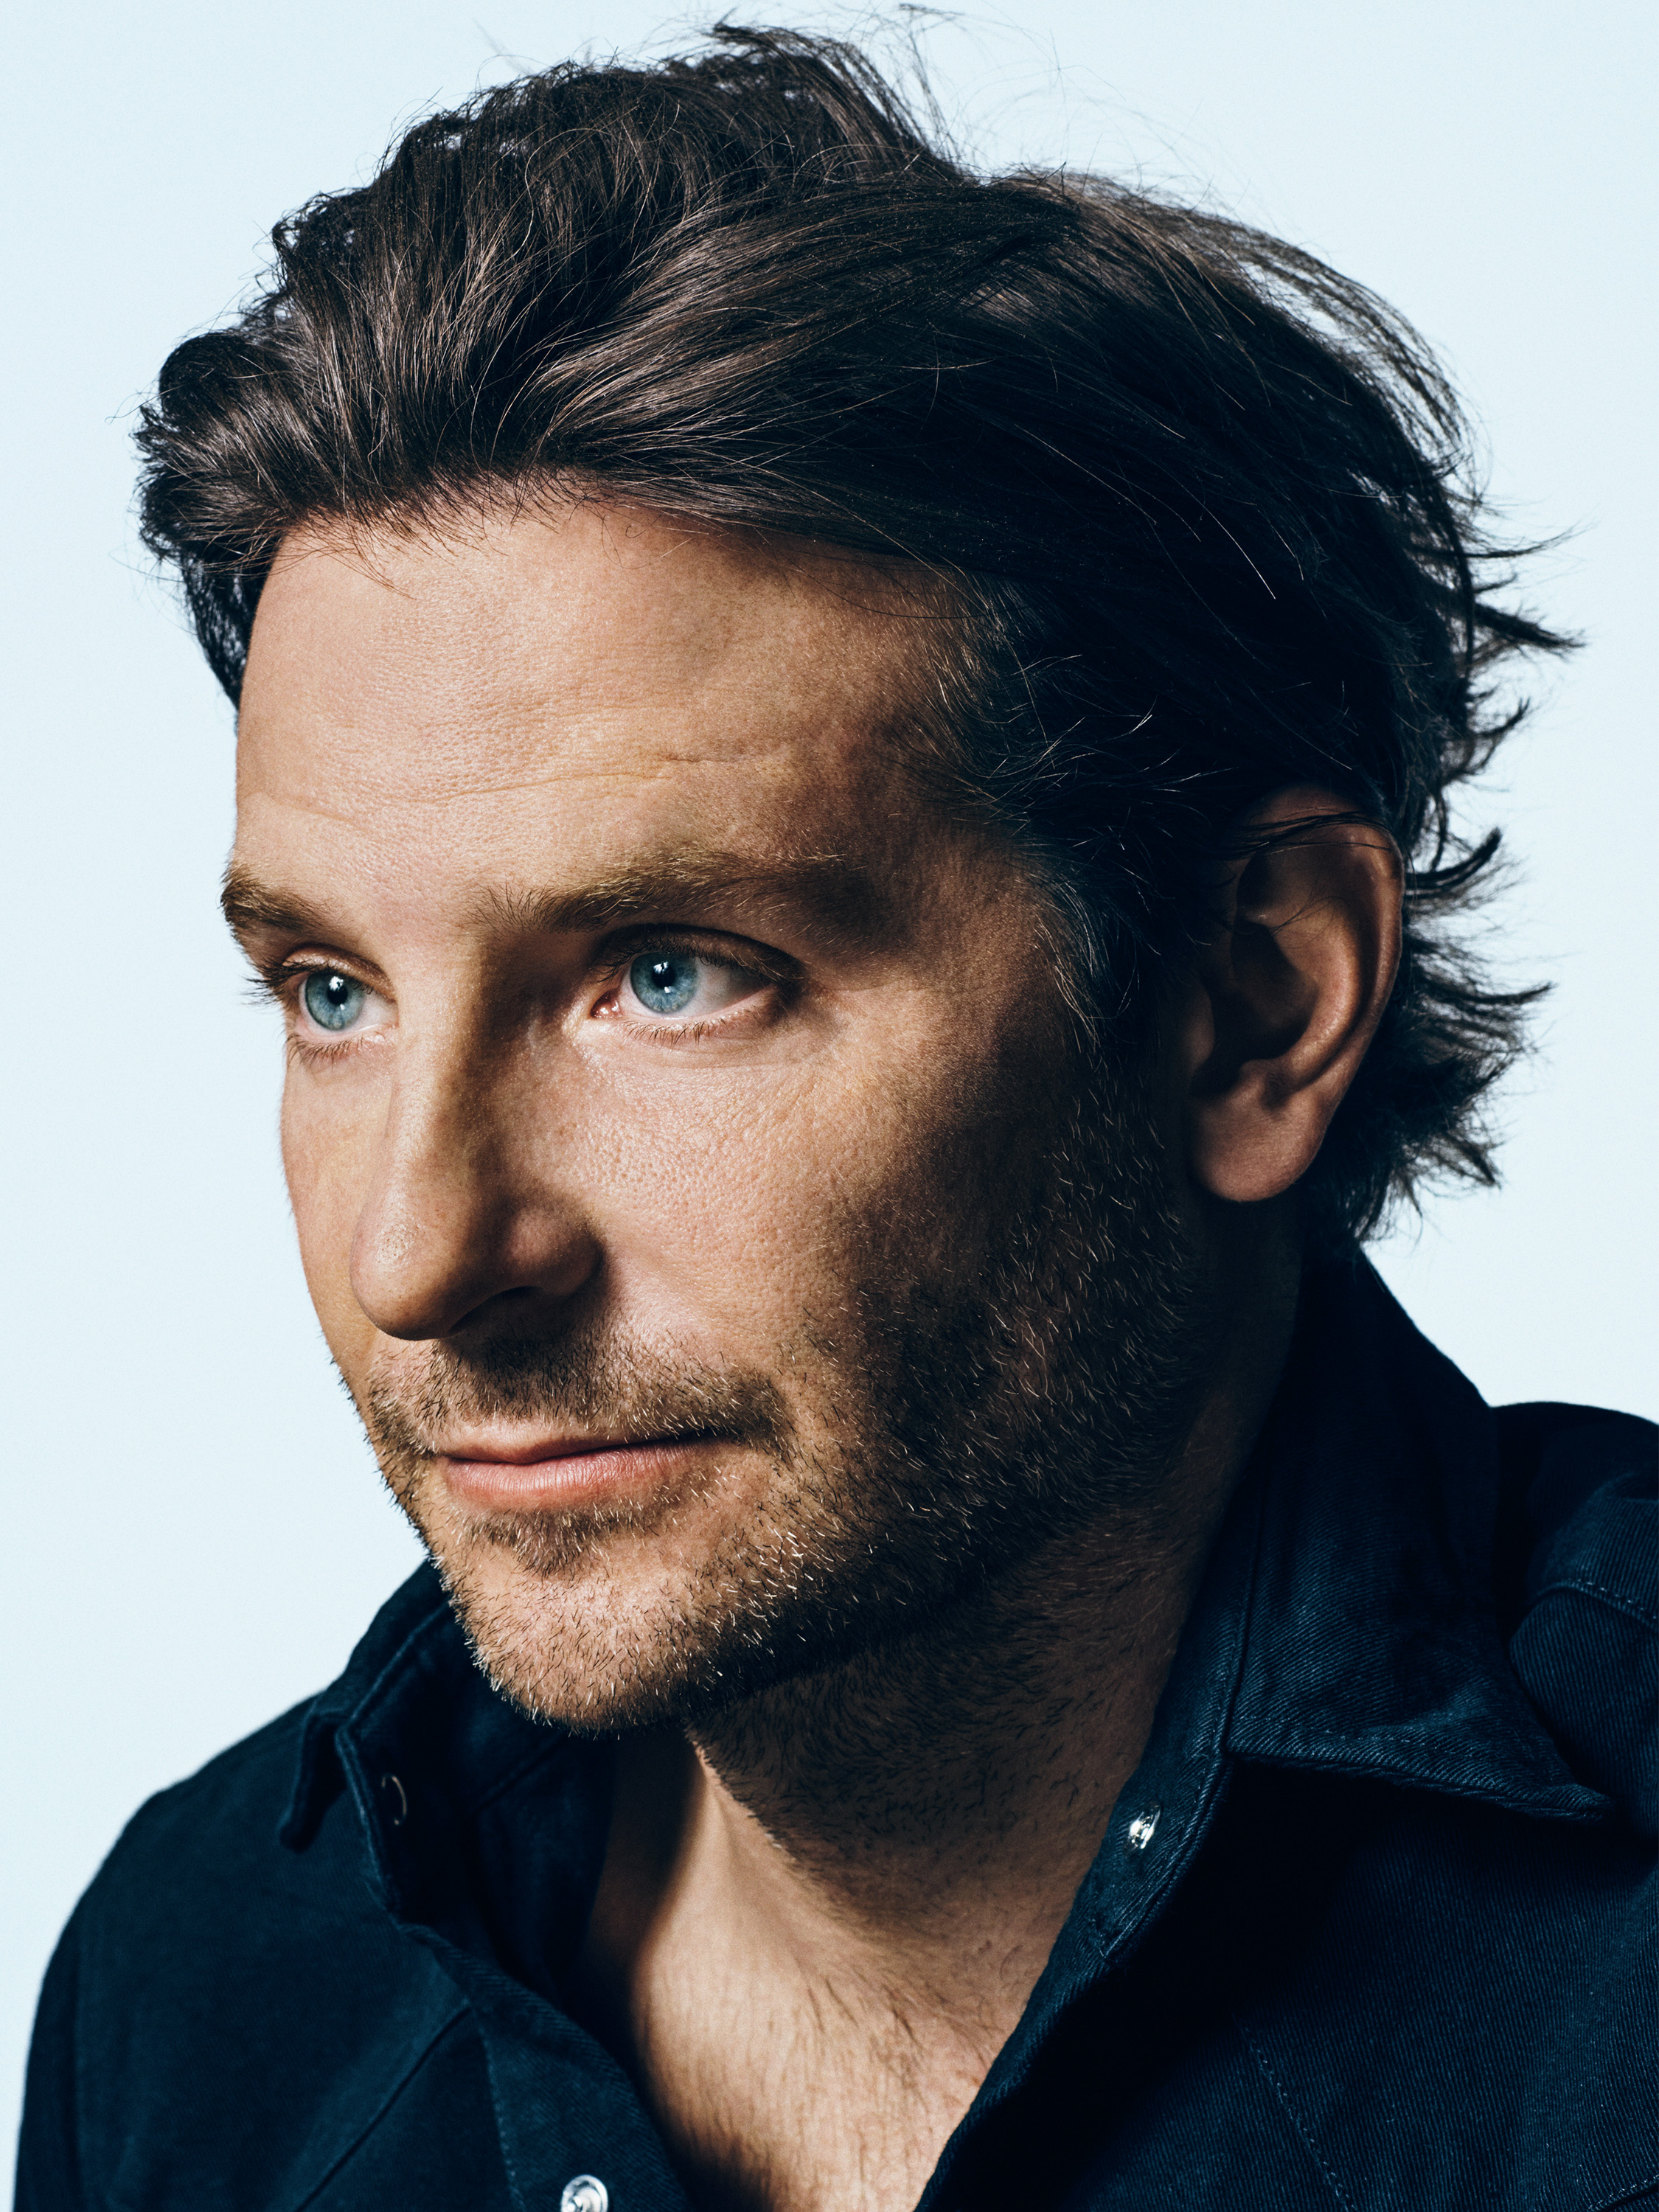 Portrait of actor Bradley Cooper photographed on Wednesday, March 4, 2015 at the TIME Magazine Studio in New York, NY.